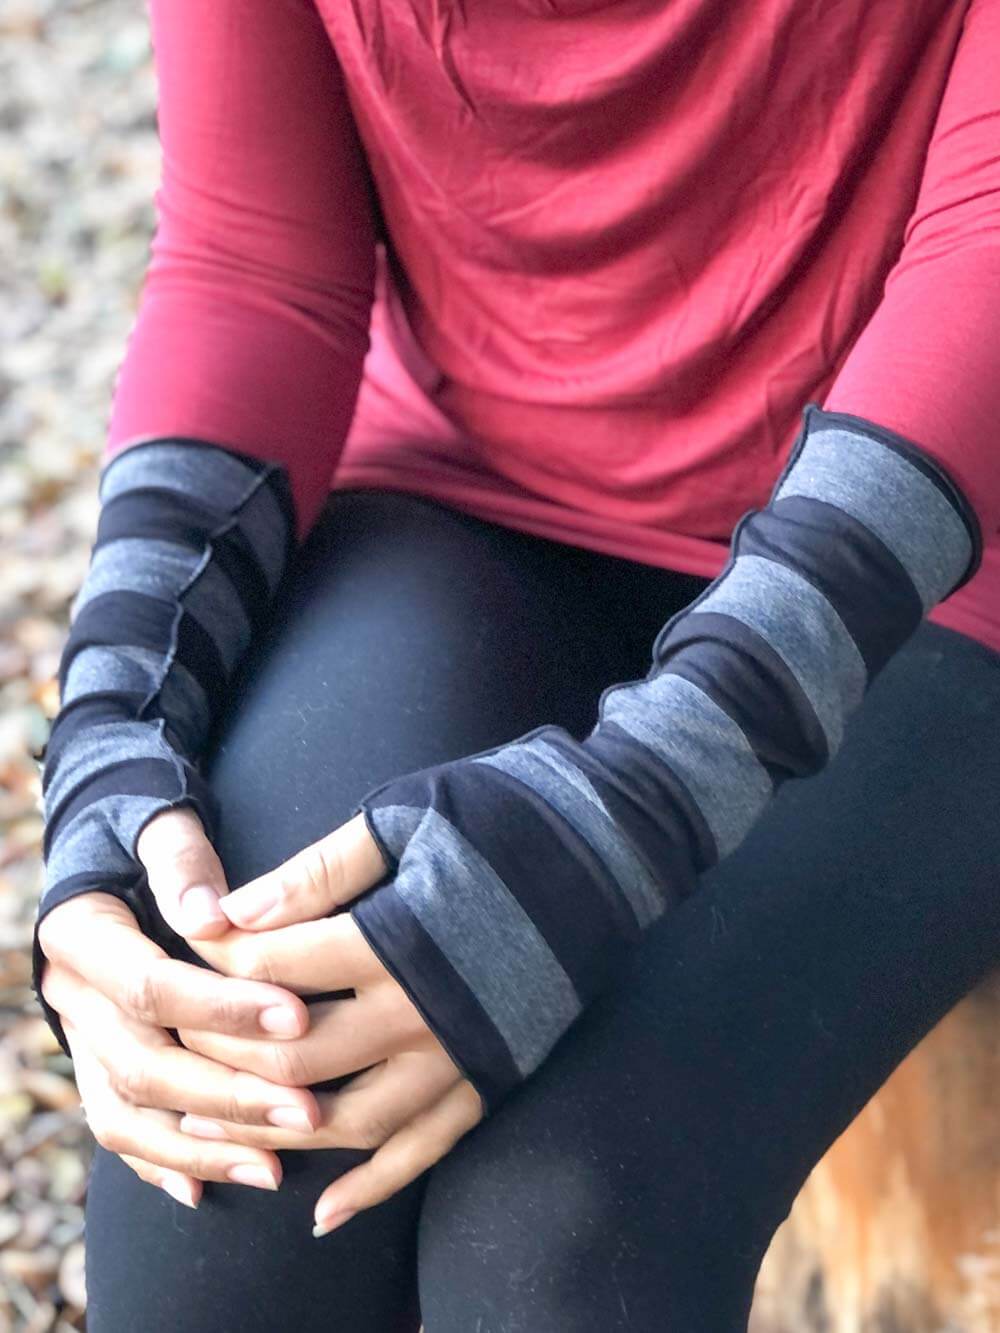 women's plant based rayon jersey stretchy black and grey striped fingerless gloves #color_black-grey